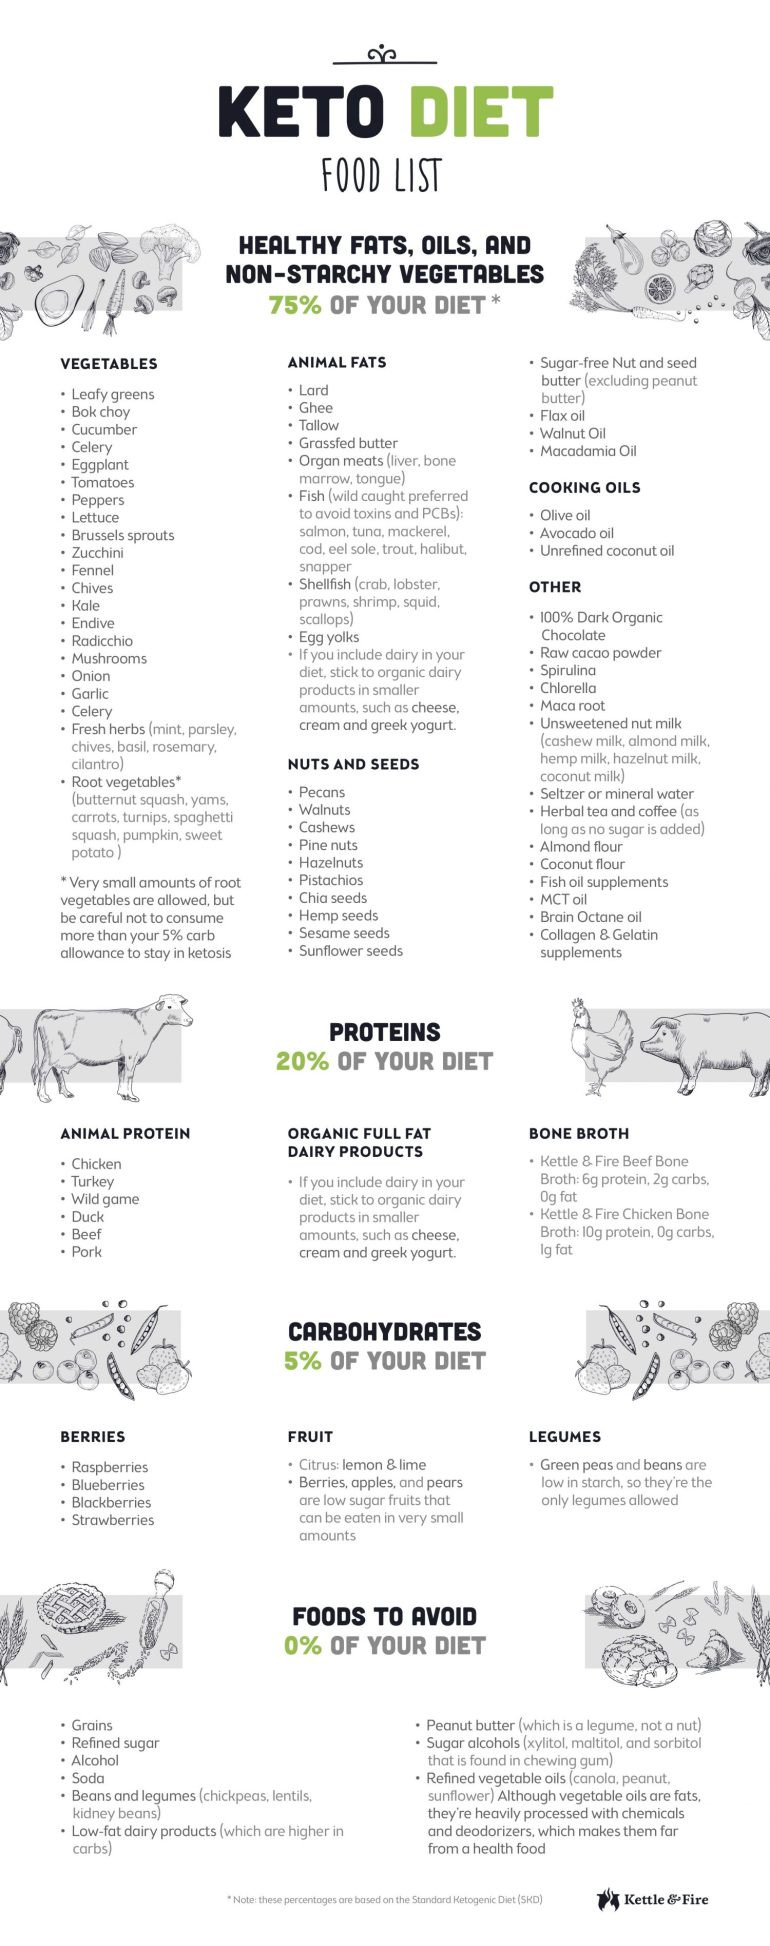 Keto Diet For Beginners Meal Plan With Grocery List Week 1
 The Ultimate Keto Diet Beginner s Guide & Grocery List